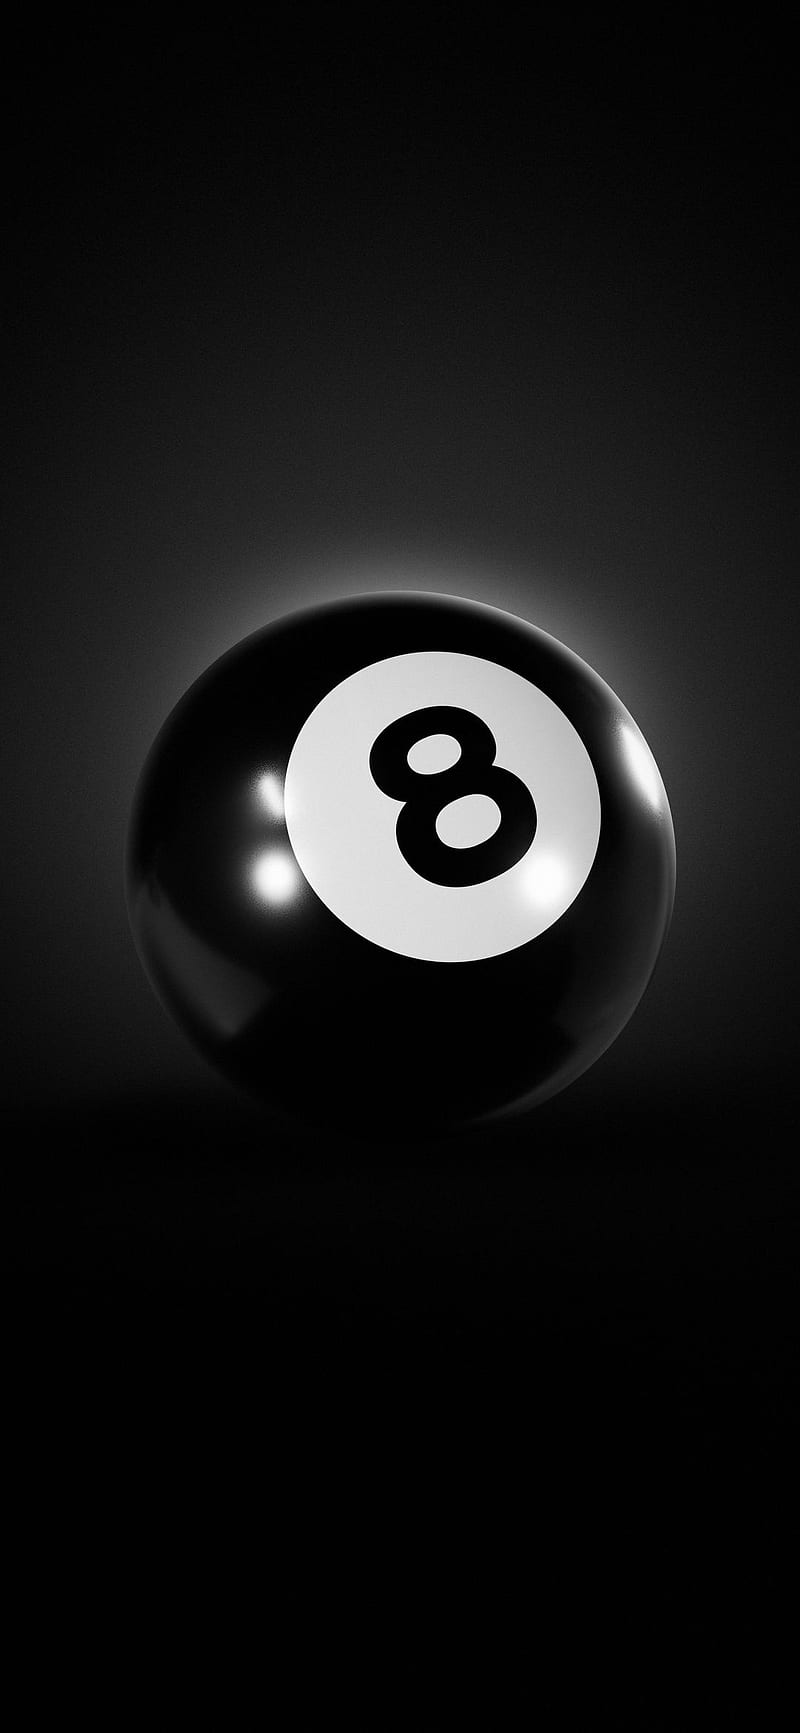 Free download Pool 8 ball 1 hd wallpapers Pool 8 ball 1 hq desktop  background 1280x800 for your Desktop Mobile  Tablet  Explore 76 8  Ball Wallpaper  Dragon Ball Wallpaper Dragon Ball Wallpapers Magic 8  Ball Wallpaper